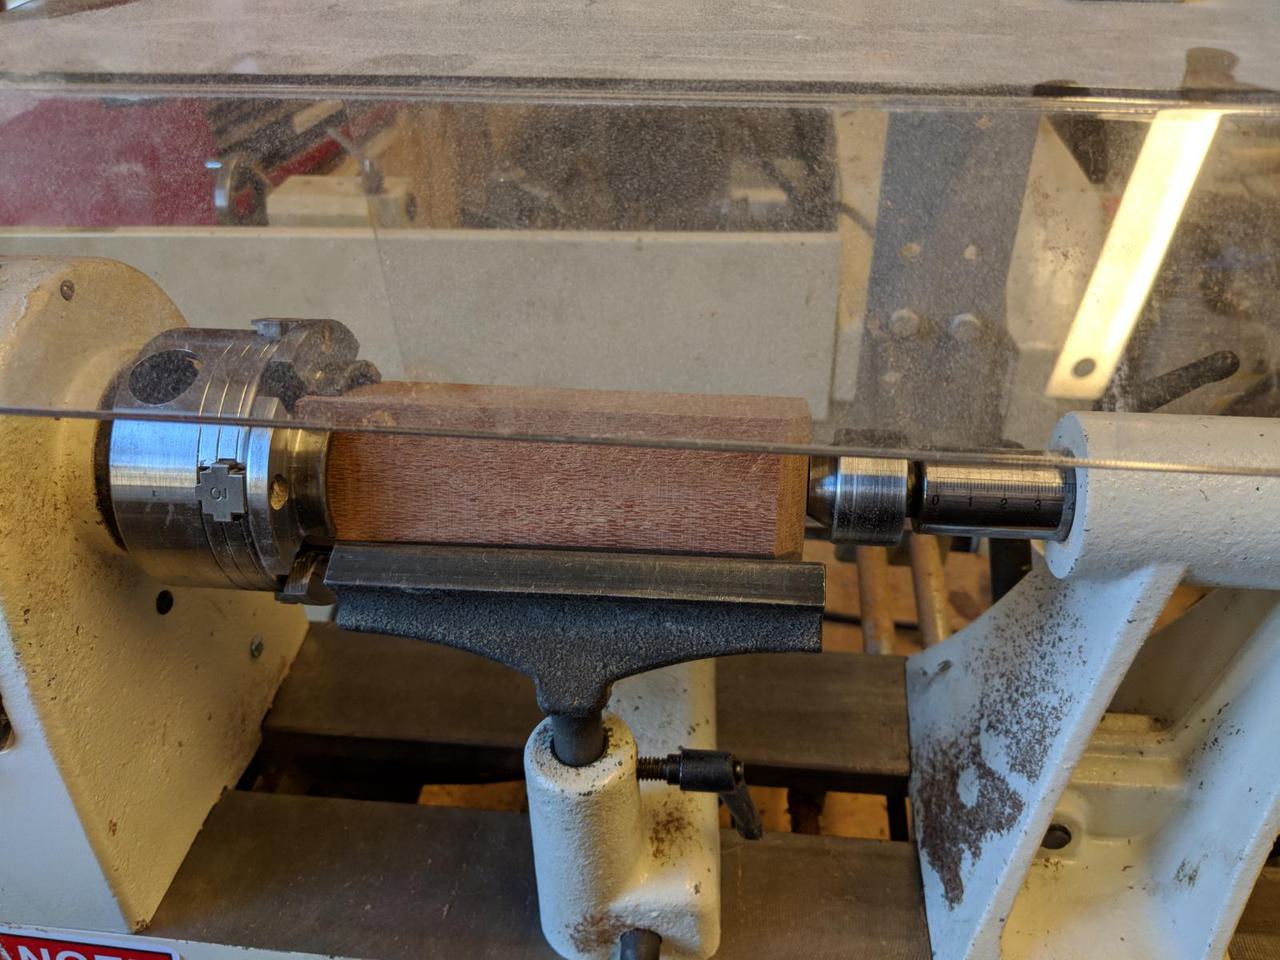 wooden block mounted in wood lathe with metal edge, called a banjo, near the wooden block.